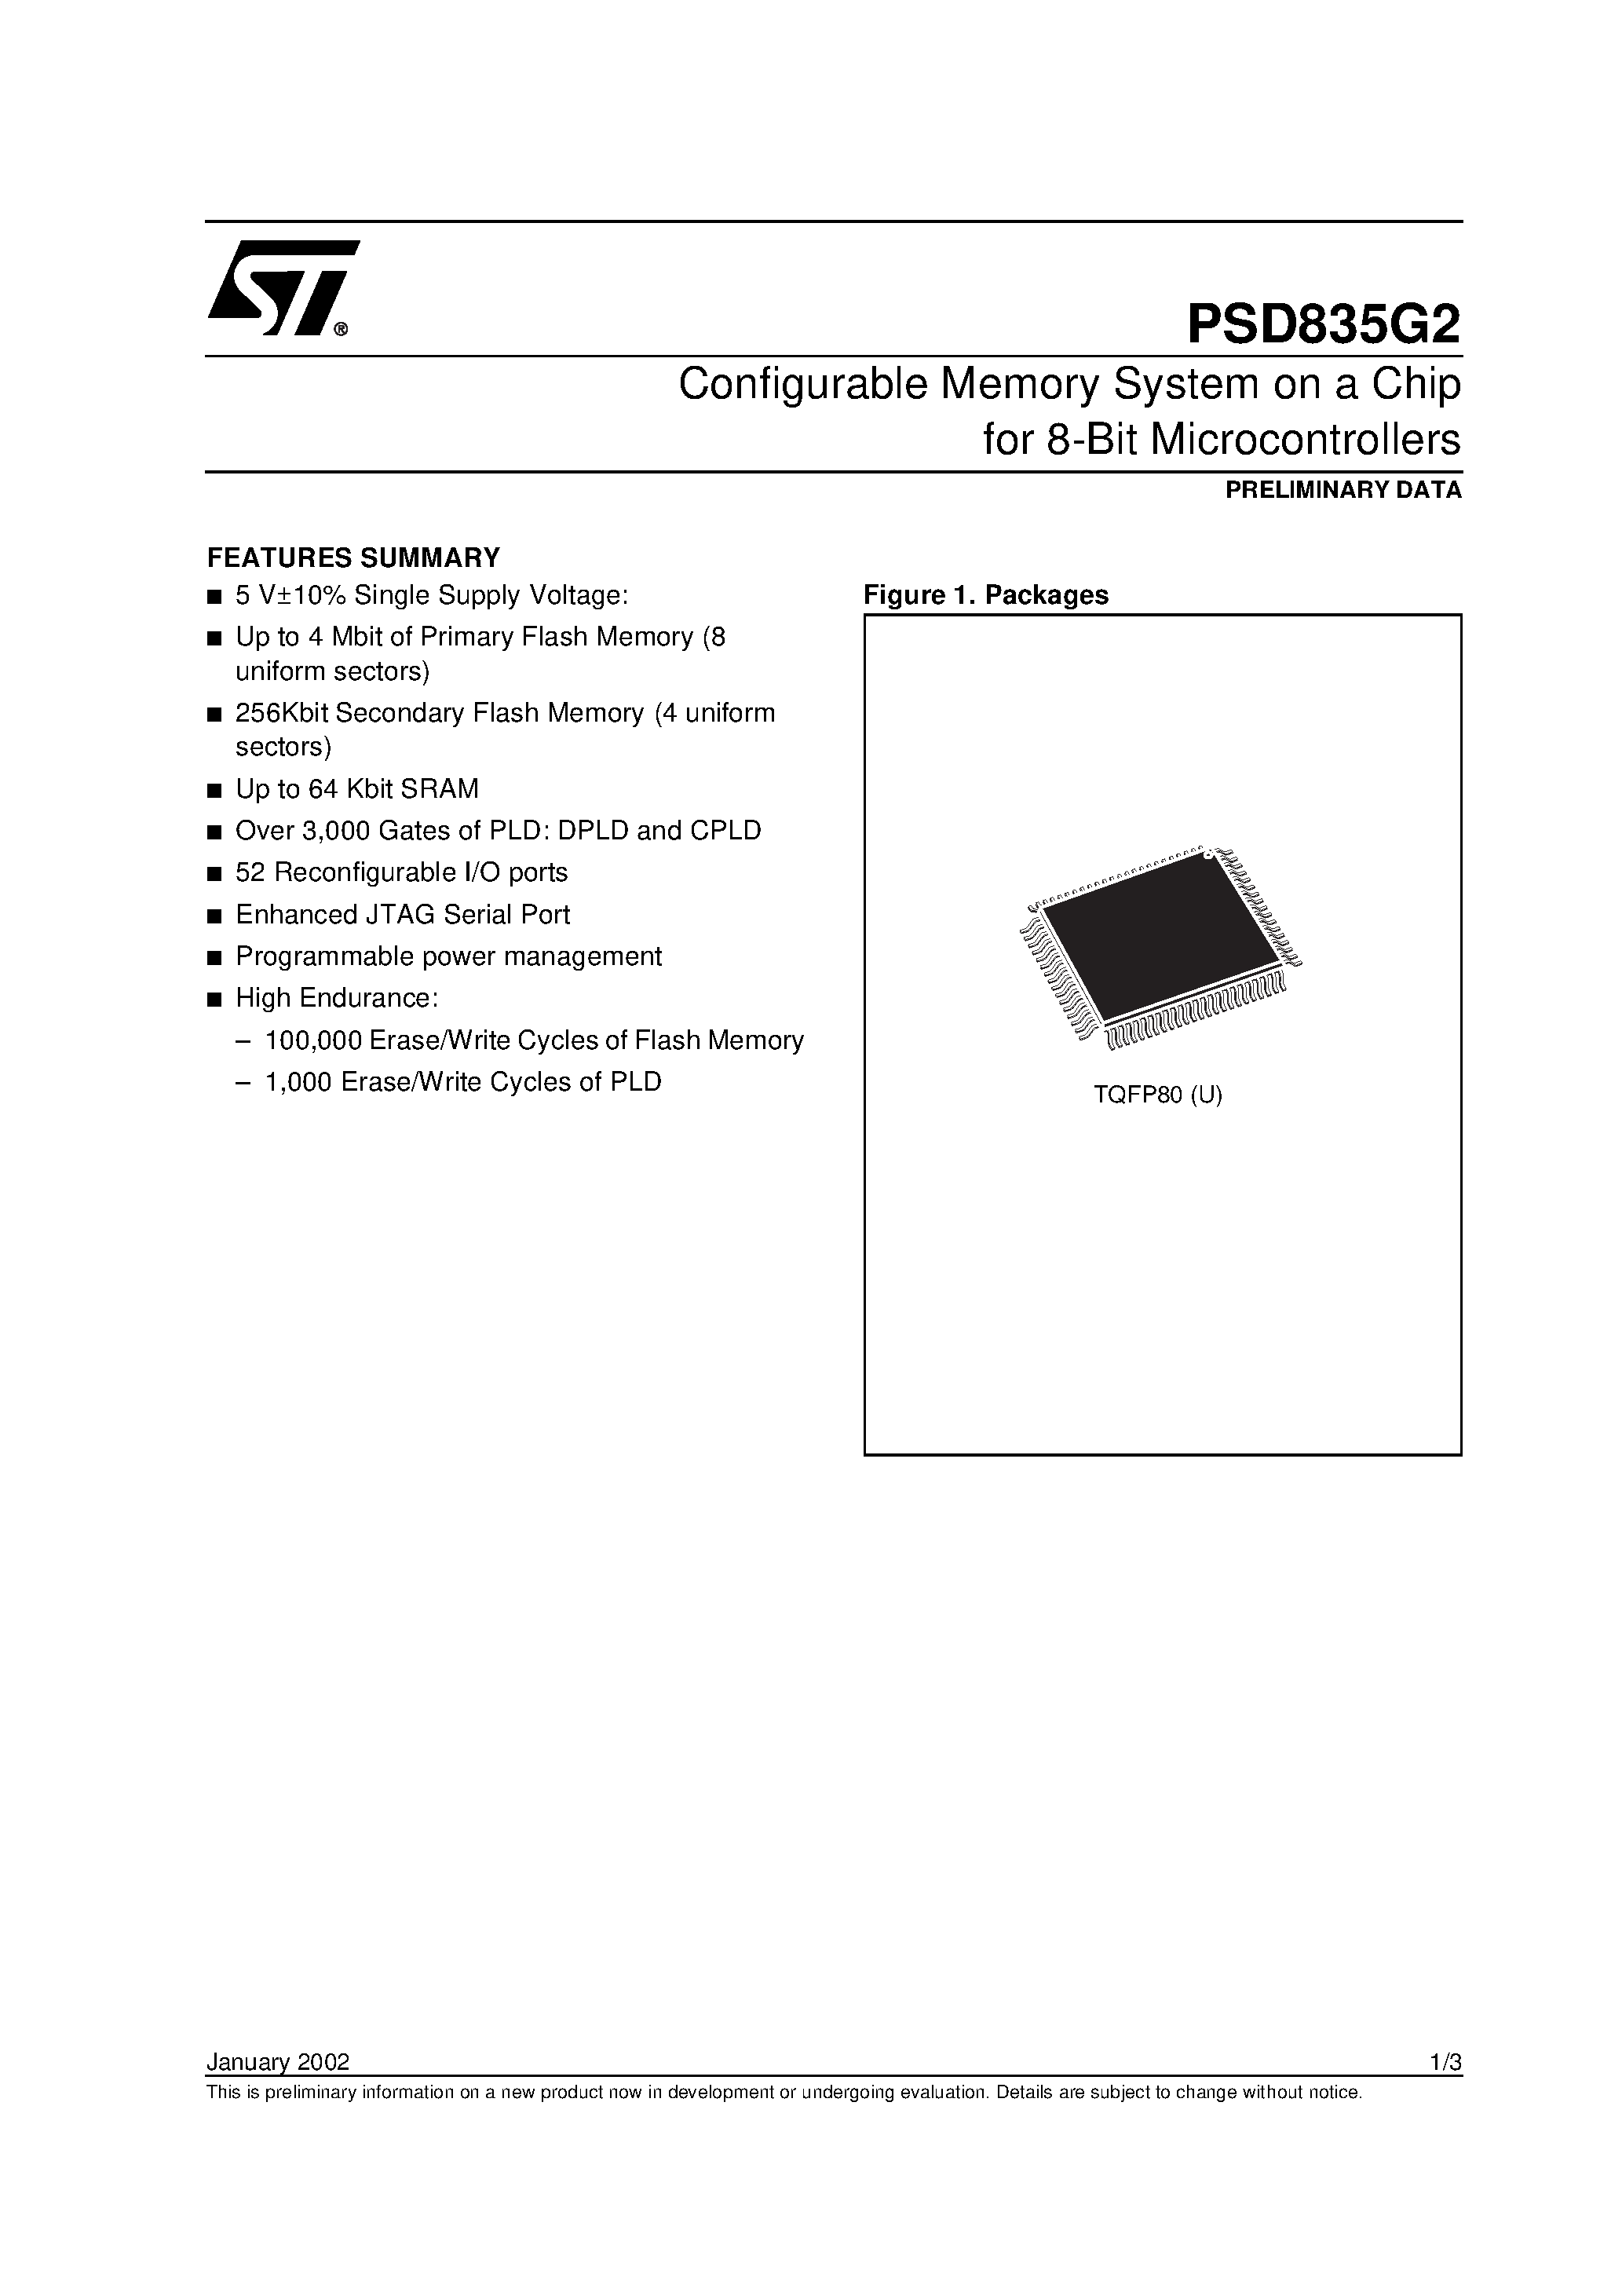 Datasheet PSD835F1V-A-12J - Configurable Memory System on a Chip for 8-Bit Microcontrollers page 1